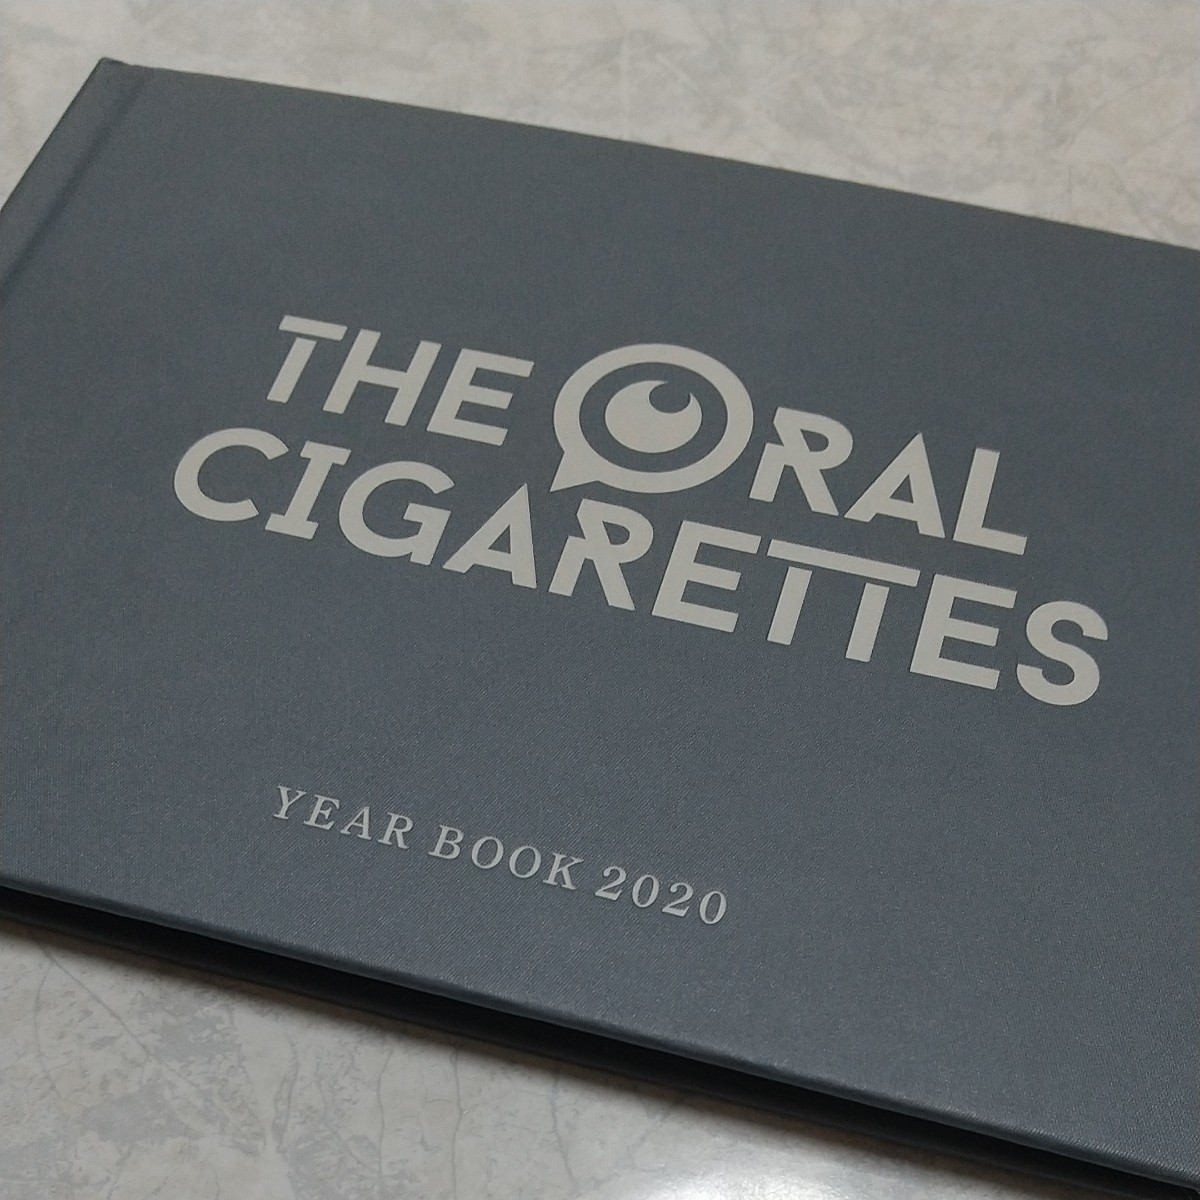 THE ORAL CIGARETTES yearbook 2020